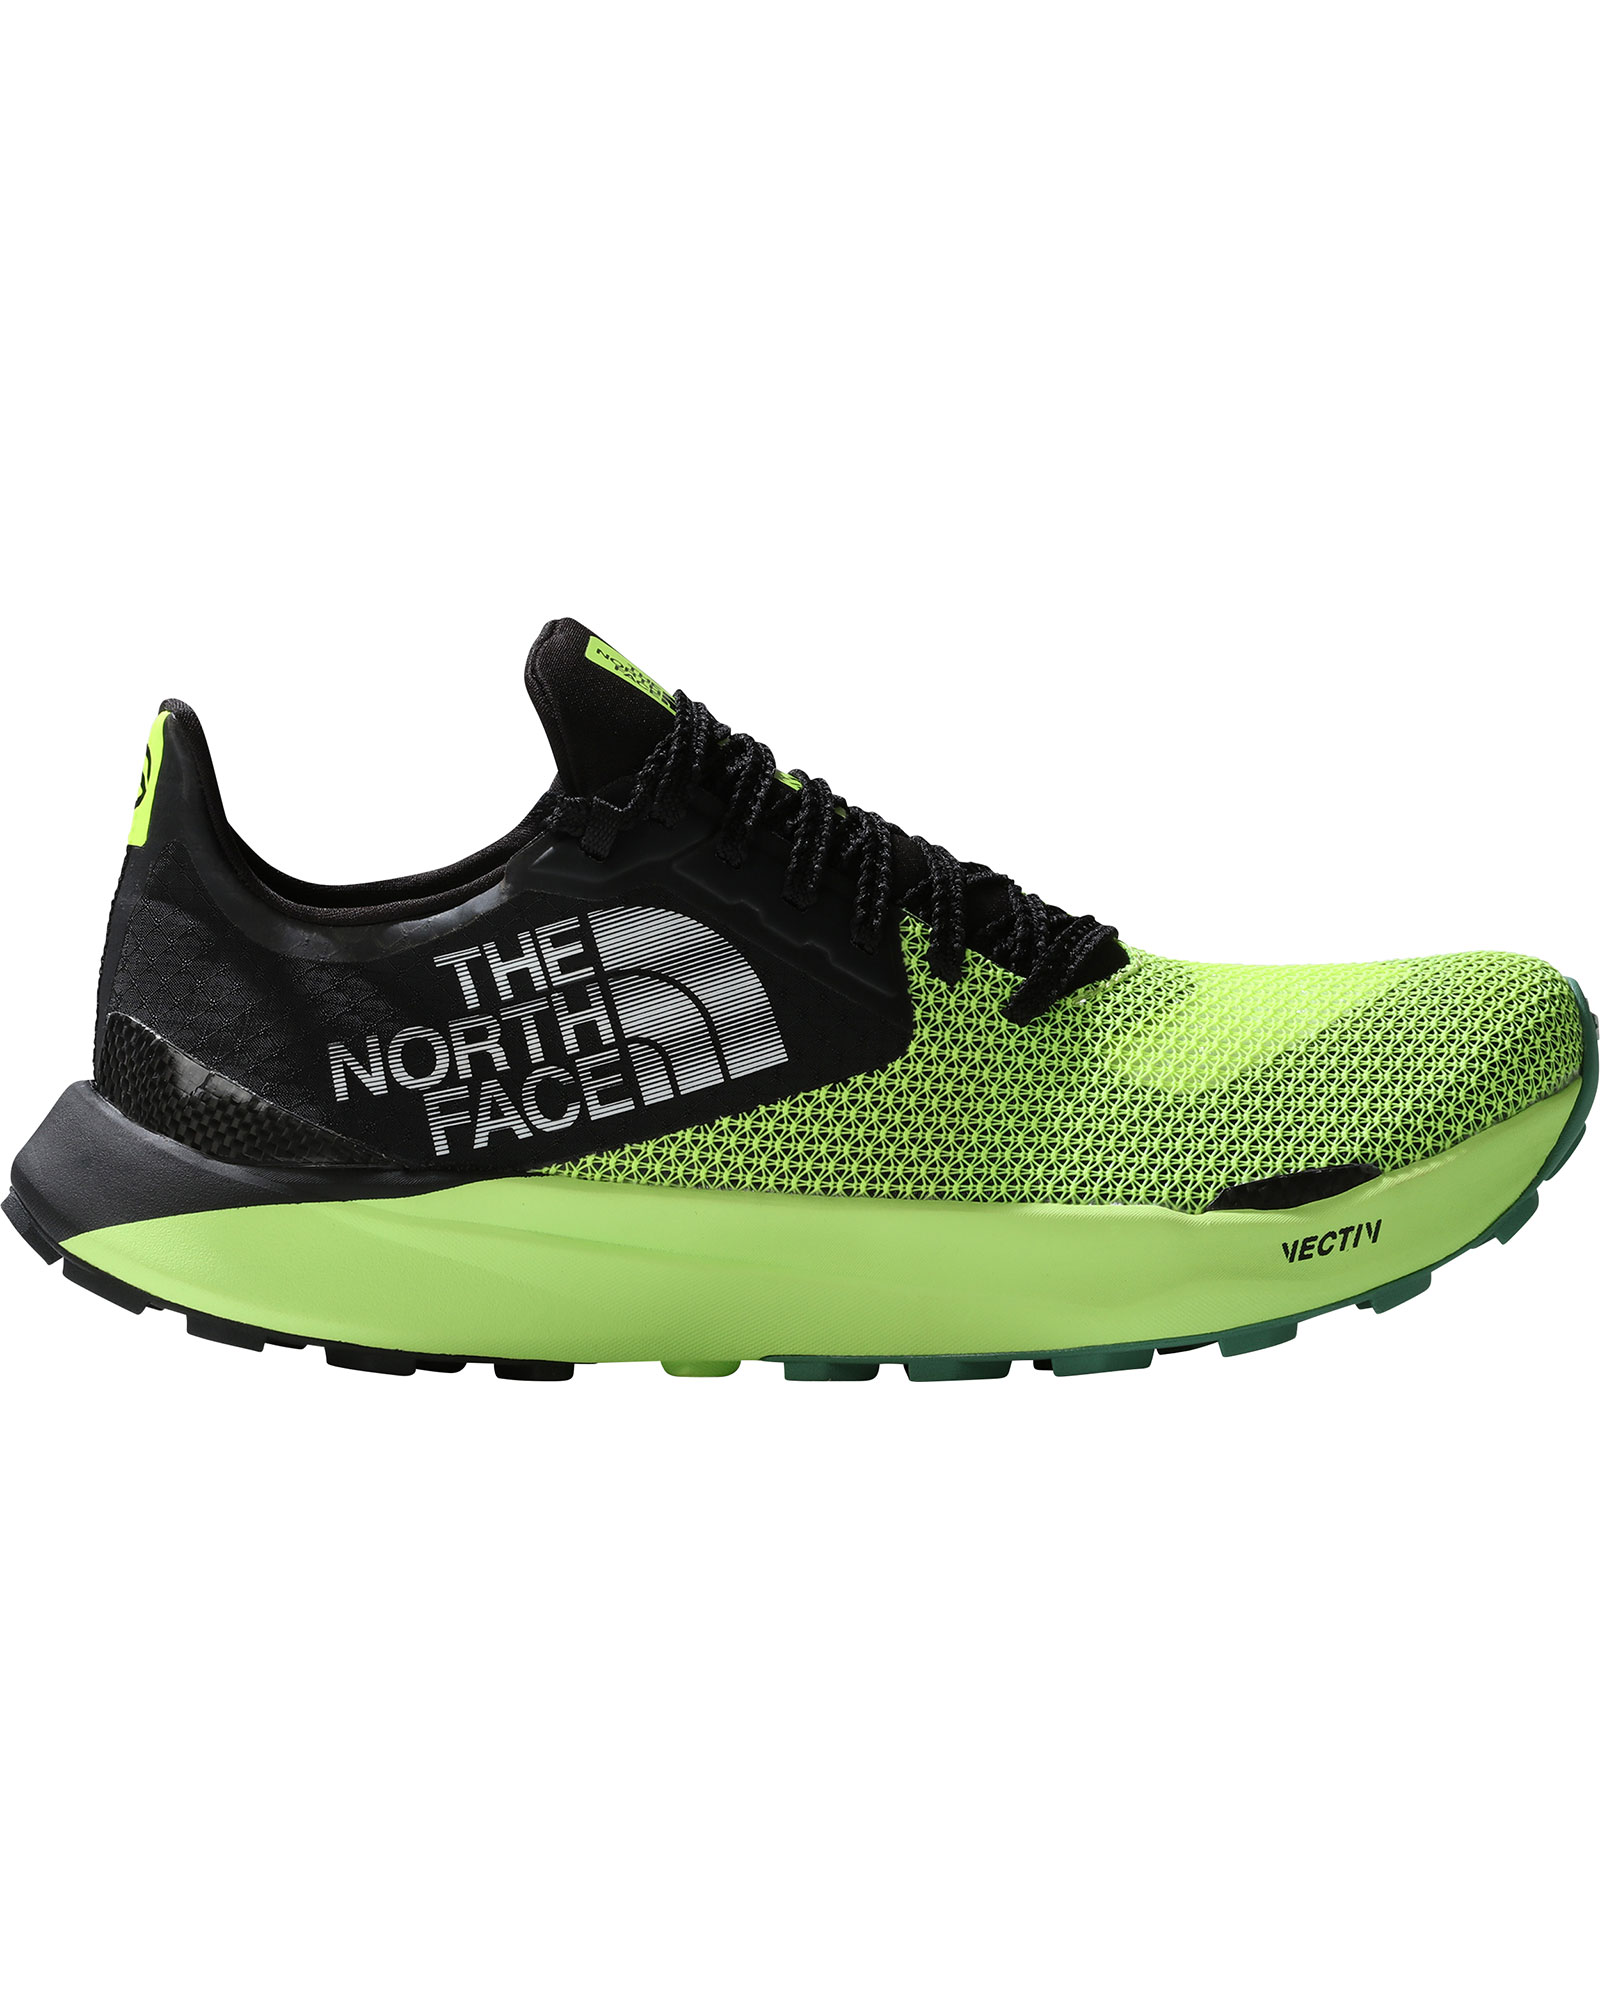 The North Face Summit Vectiv Sky Men's Trail Shoes 0